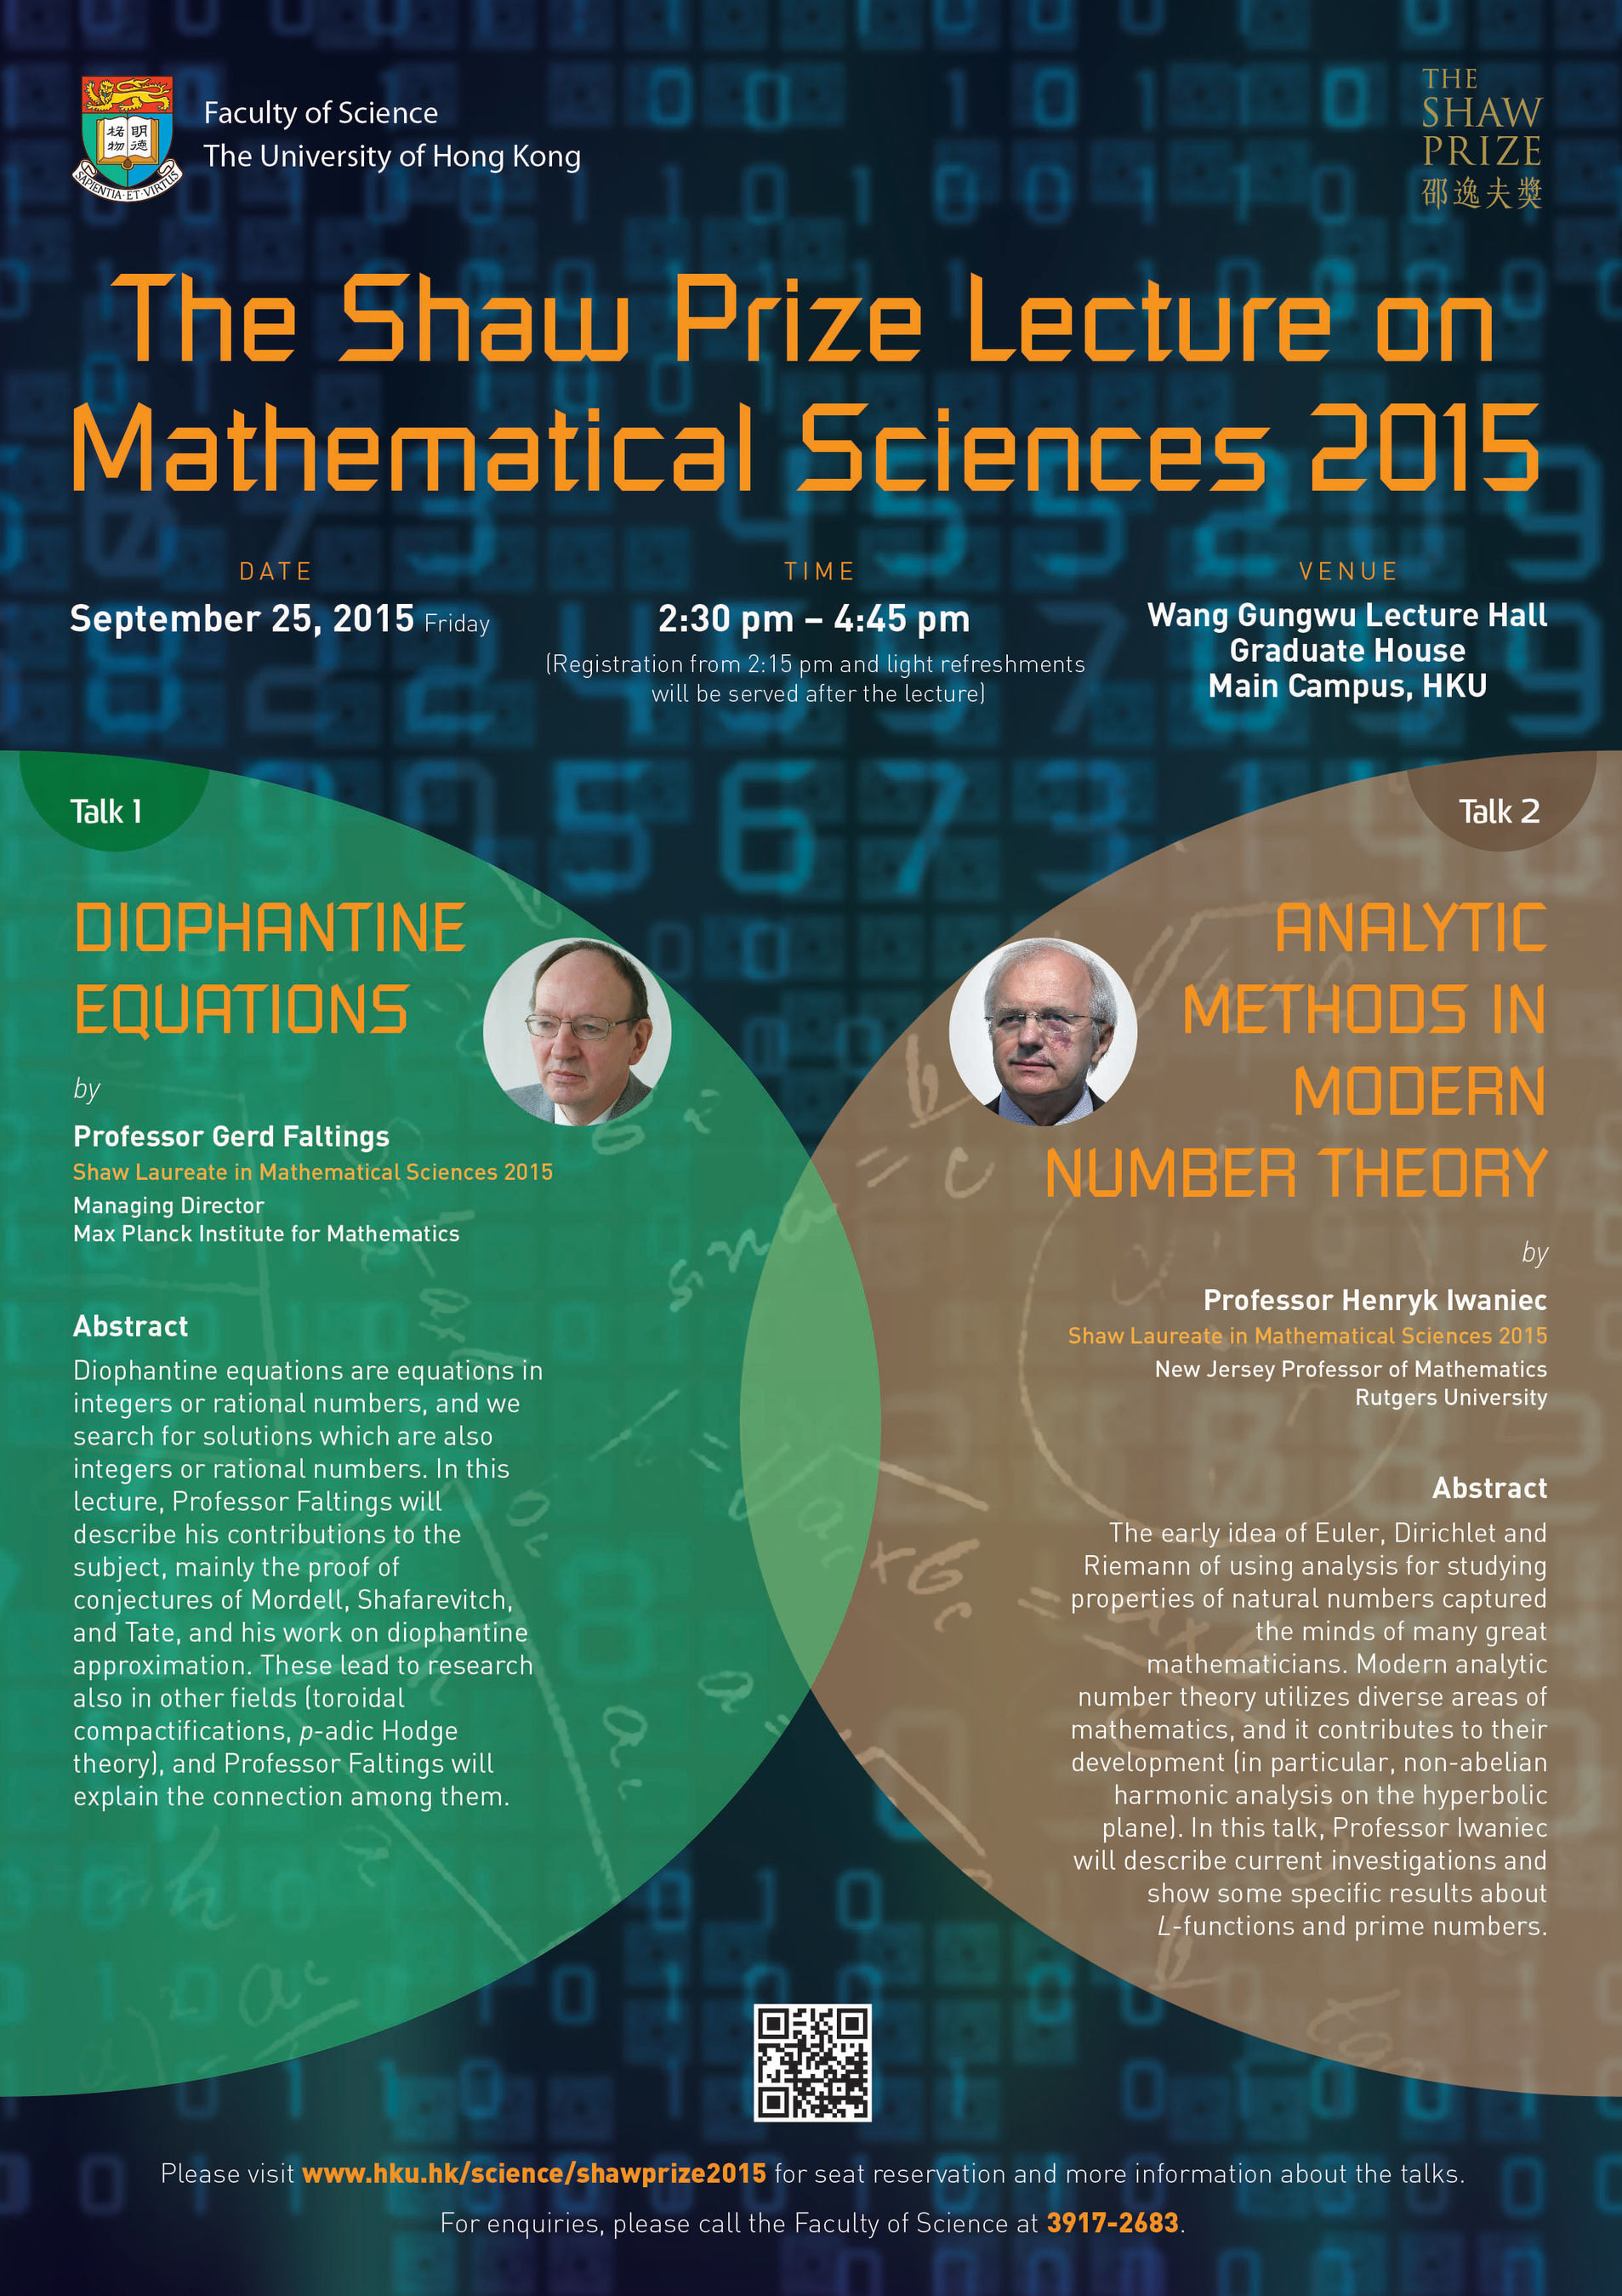 The Shaw Prize Lecture on Mathematical Sciences 2015